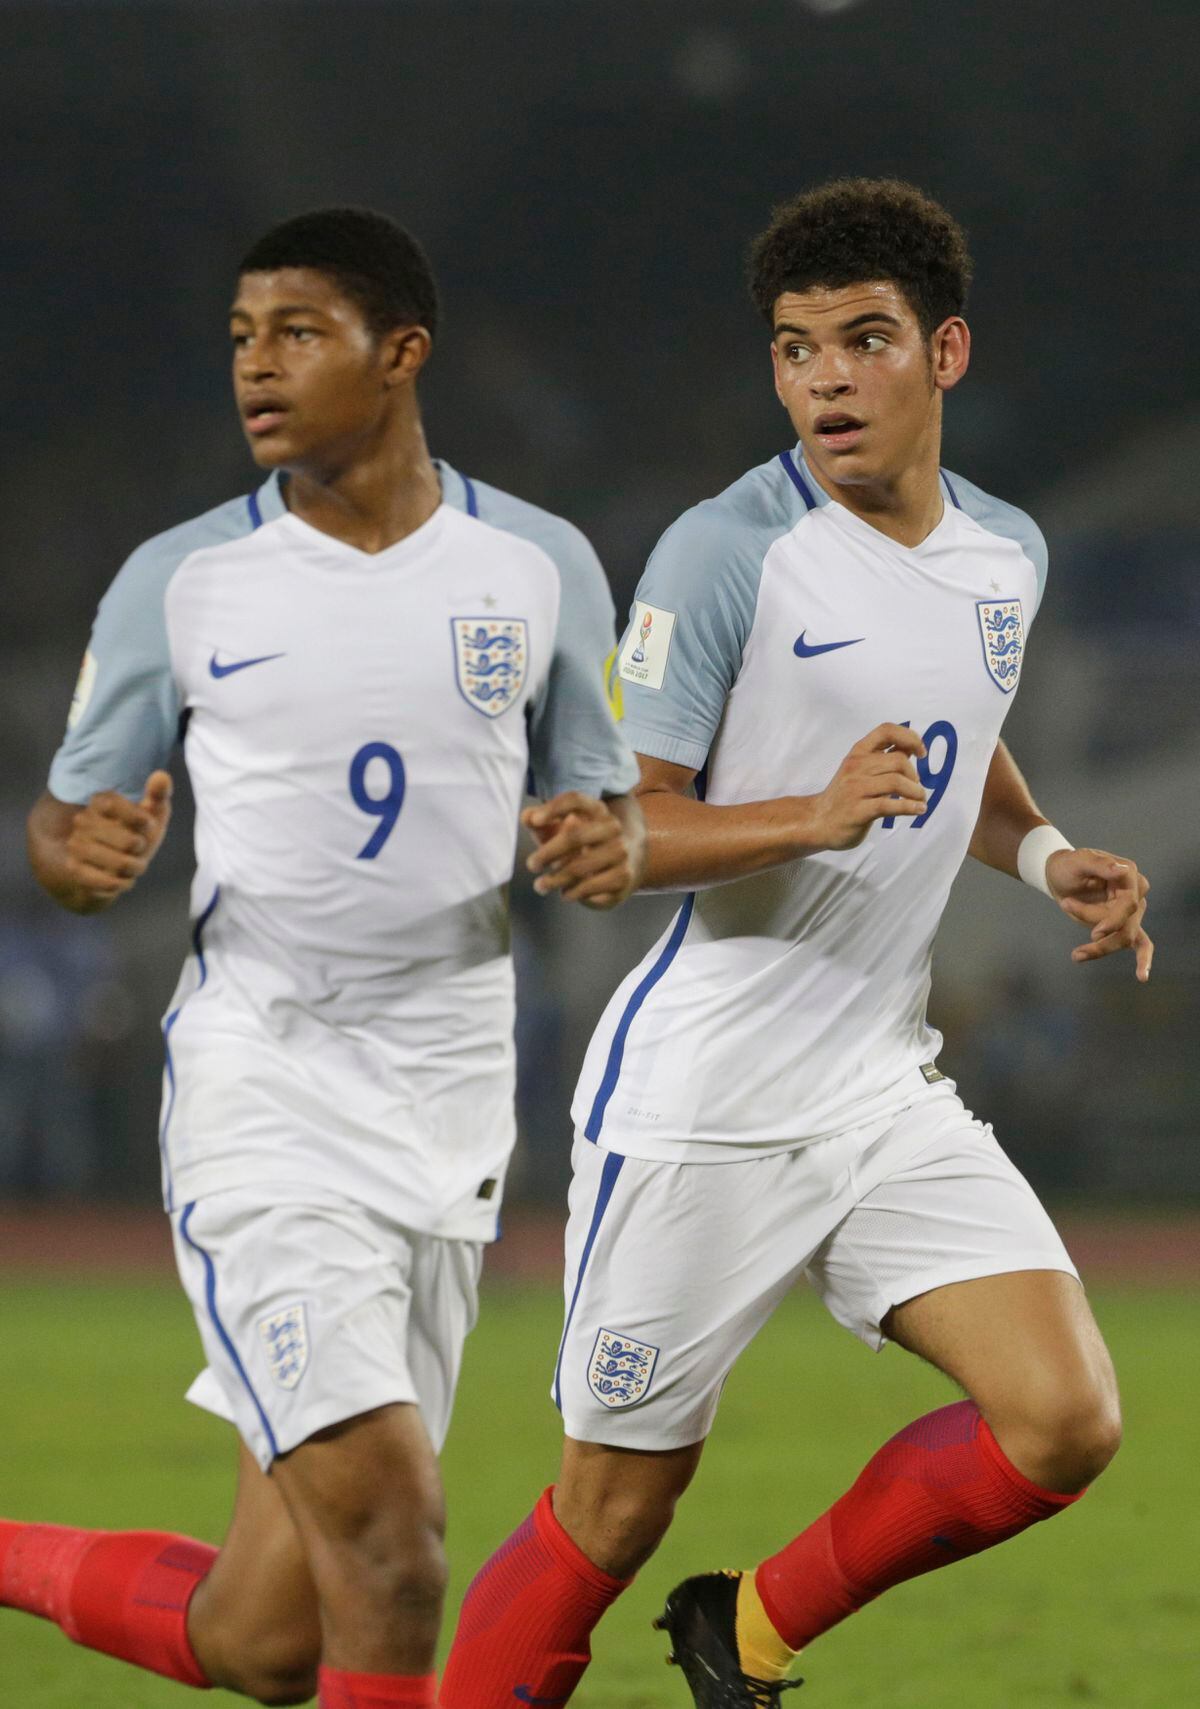 England's Morgan Gibbs White, right, and Rhian Brewster during the FIFA U17 World Cup semi-final match against Brazil 